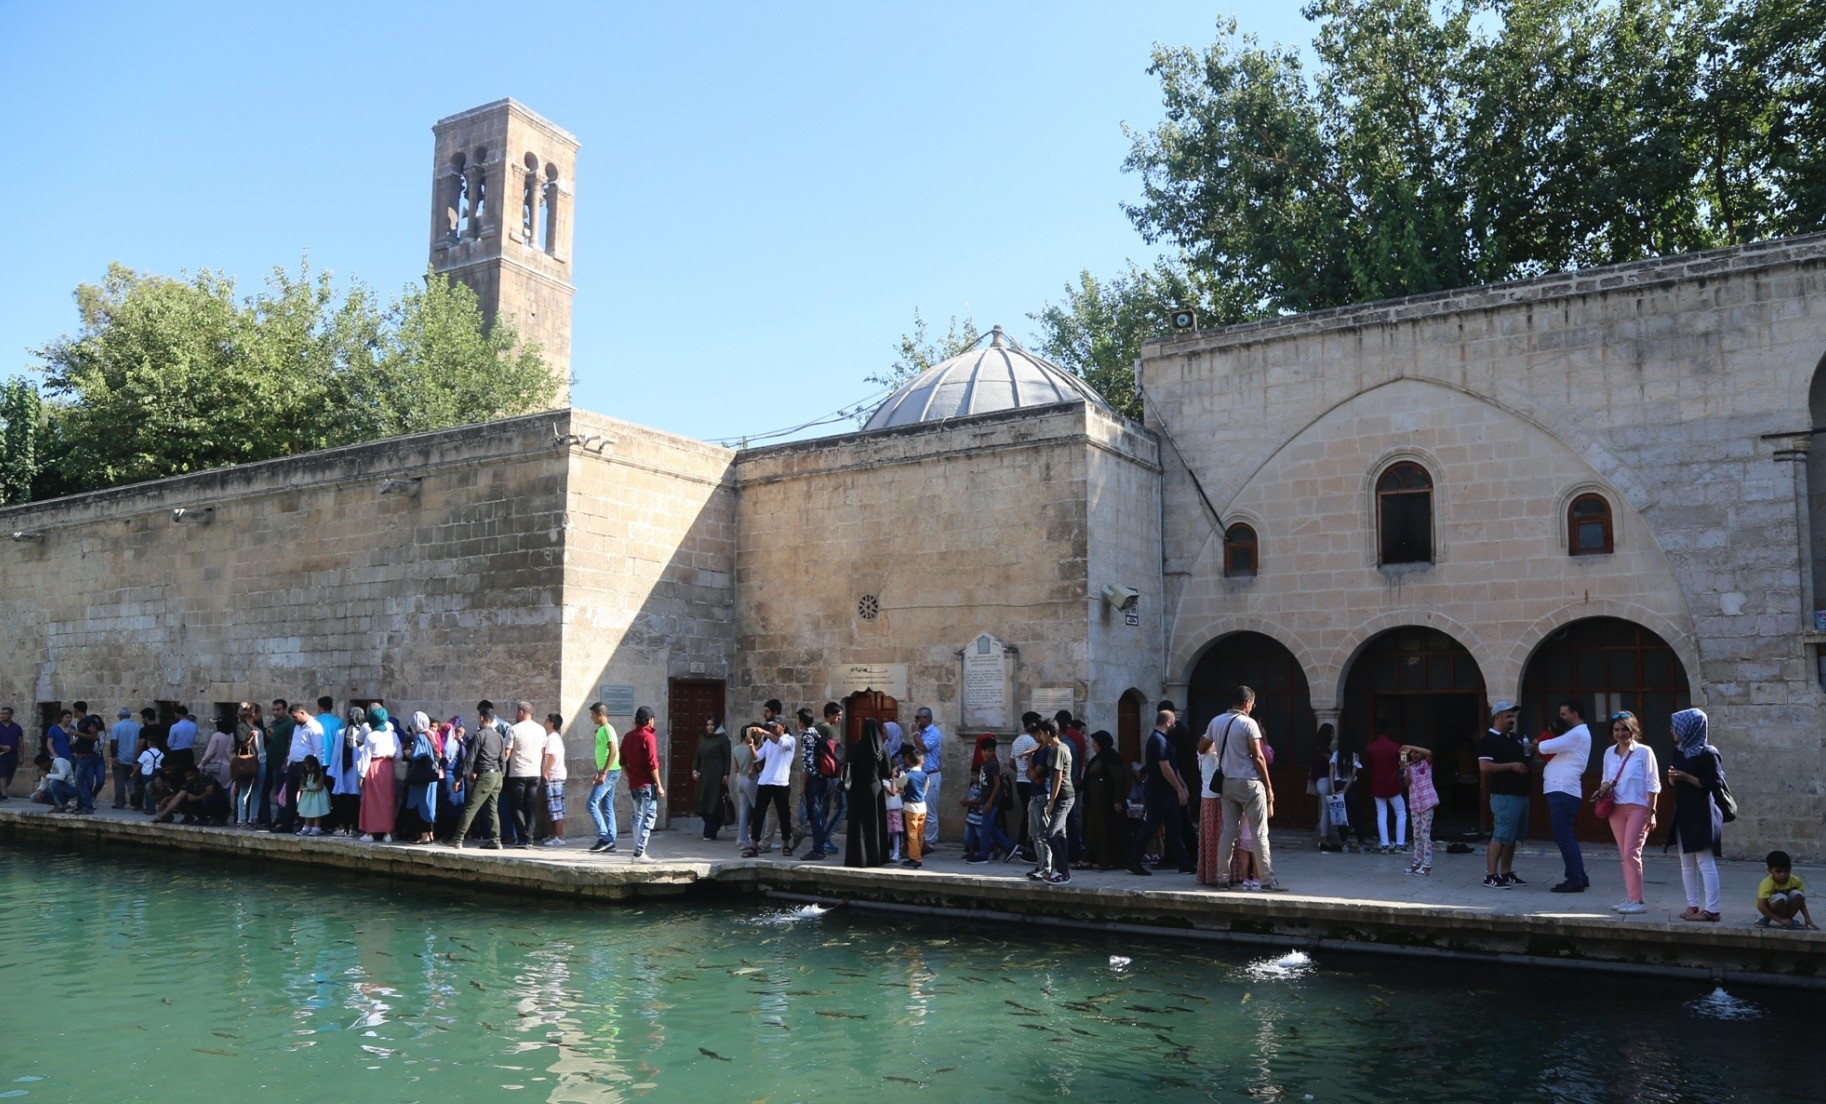 Urfa, where Prophet Abraham is believed to have been born is among the most visited and prominent centers of the region.